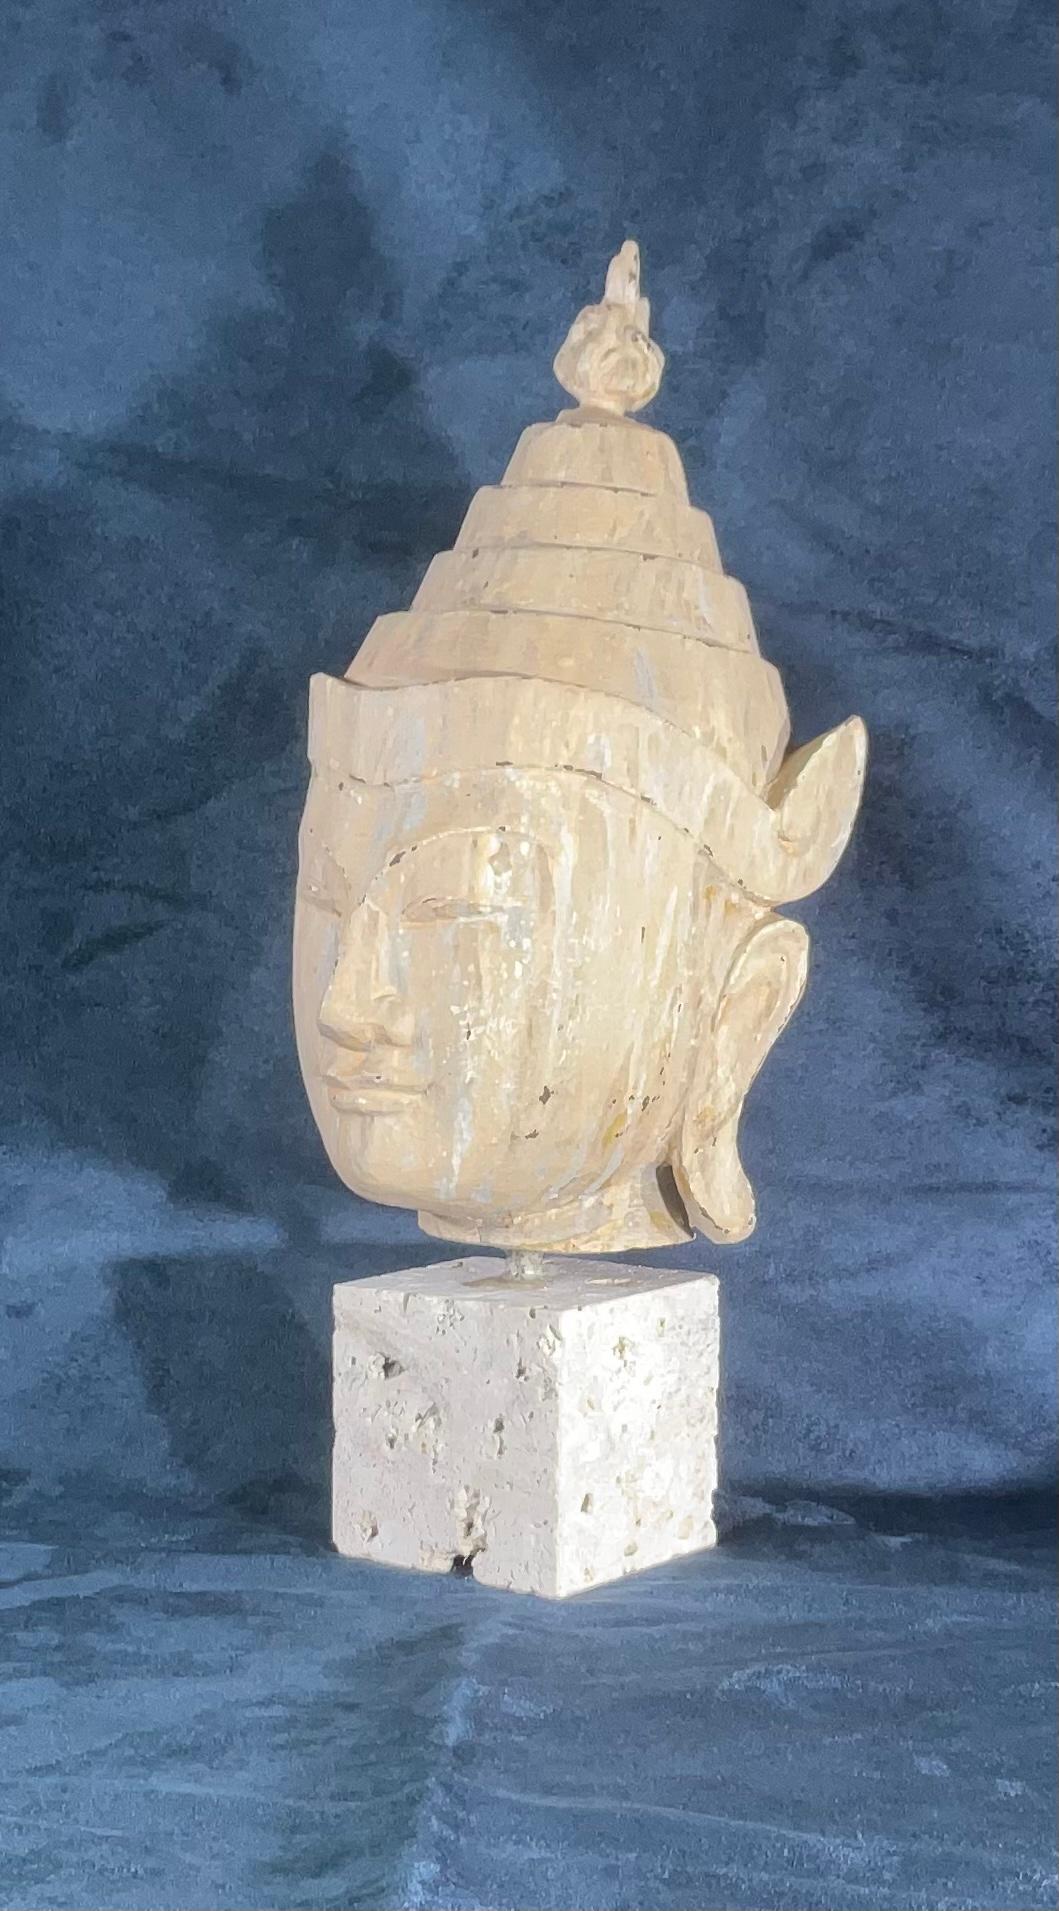 A fine example of a hand carved solid wood Oriental Buddha head, in overall good condition, hand painted and the top ornament made of bronze. Mounted on decorative genuine coral base.
   